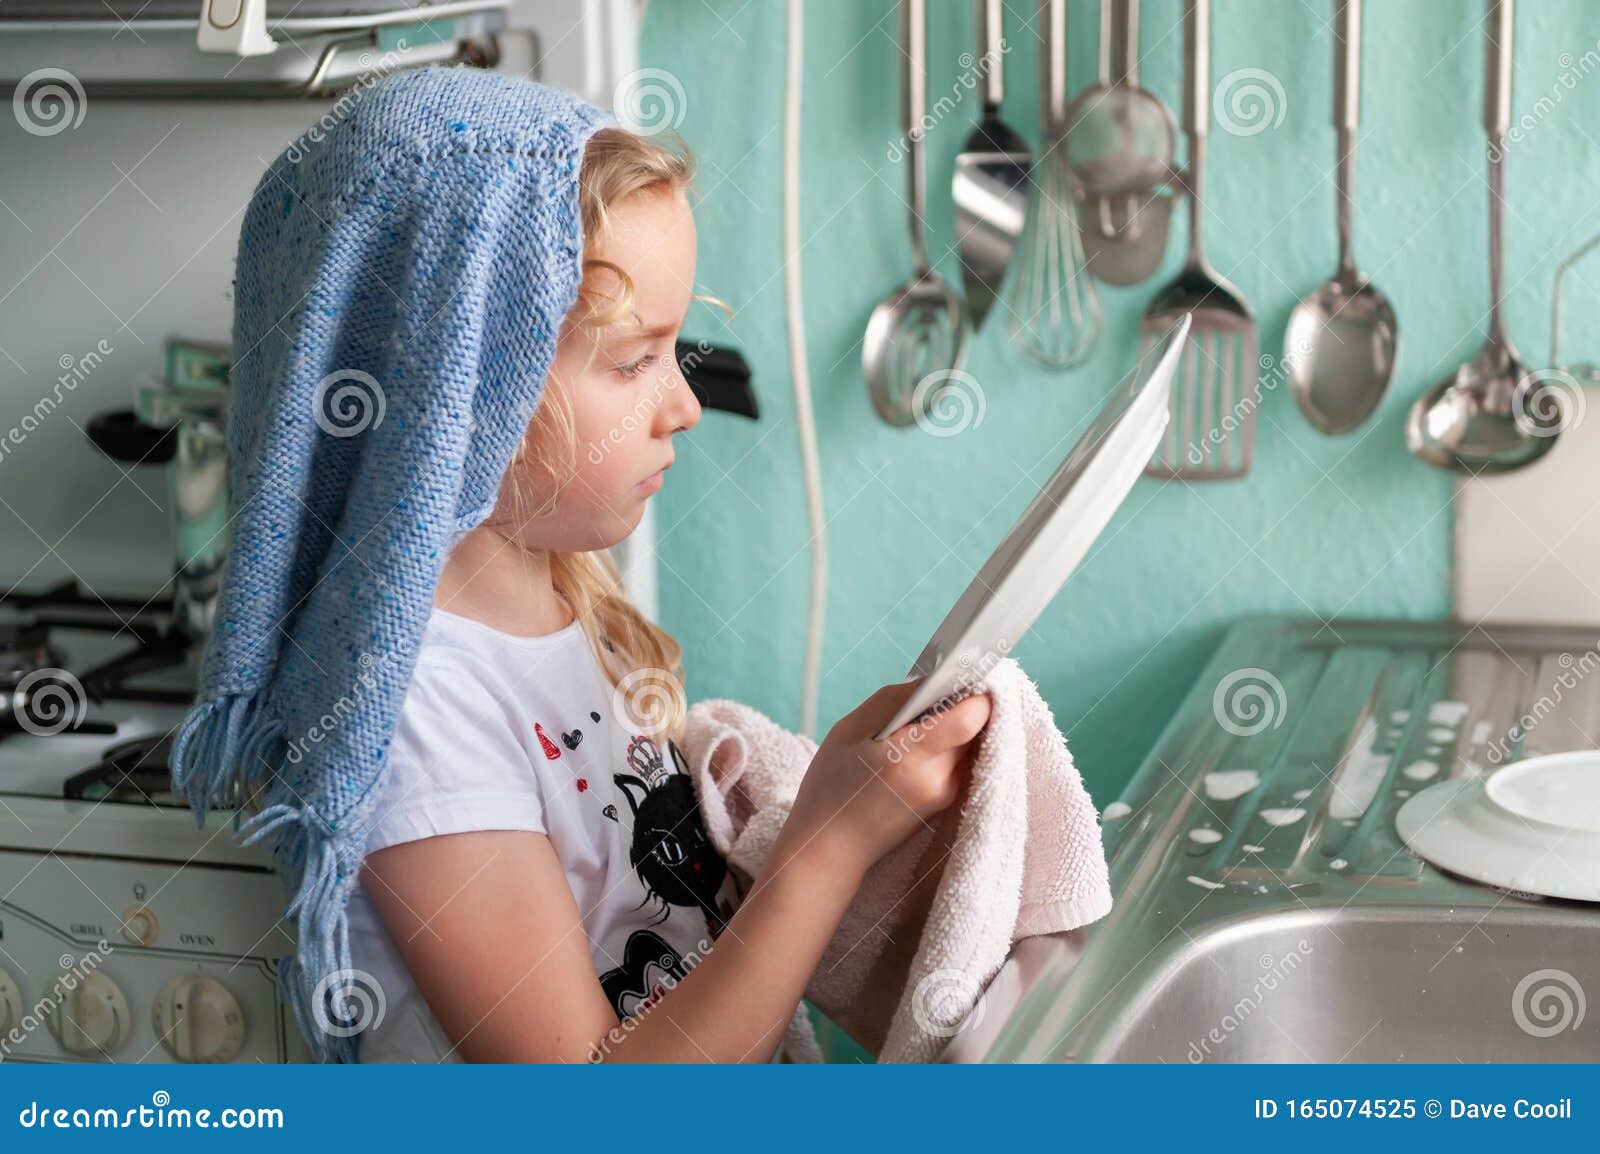 Pretty Young Girl Inspecting Dishes While Drying Up At The Kitchen Sink Stock Image Image Of